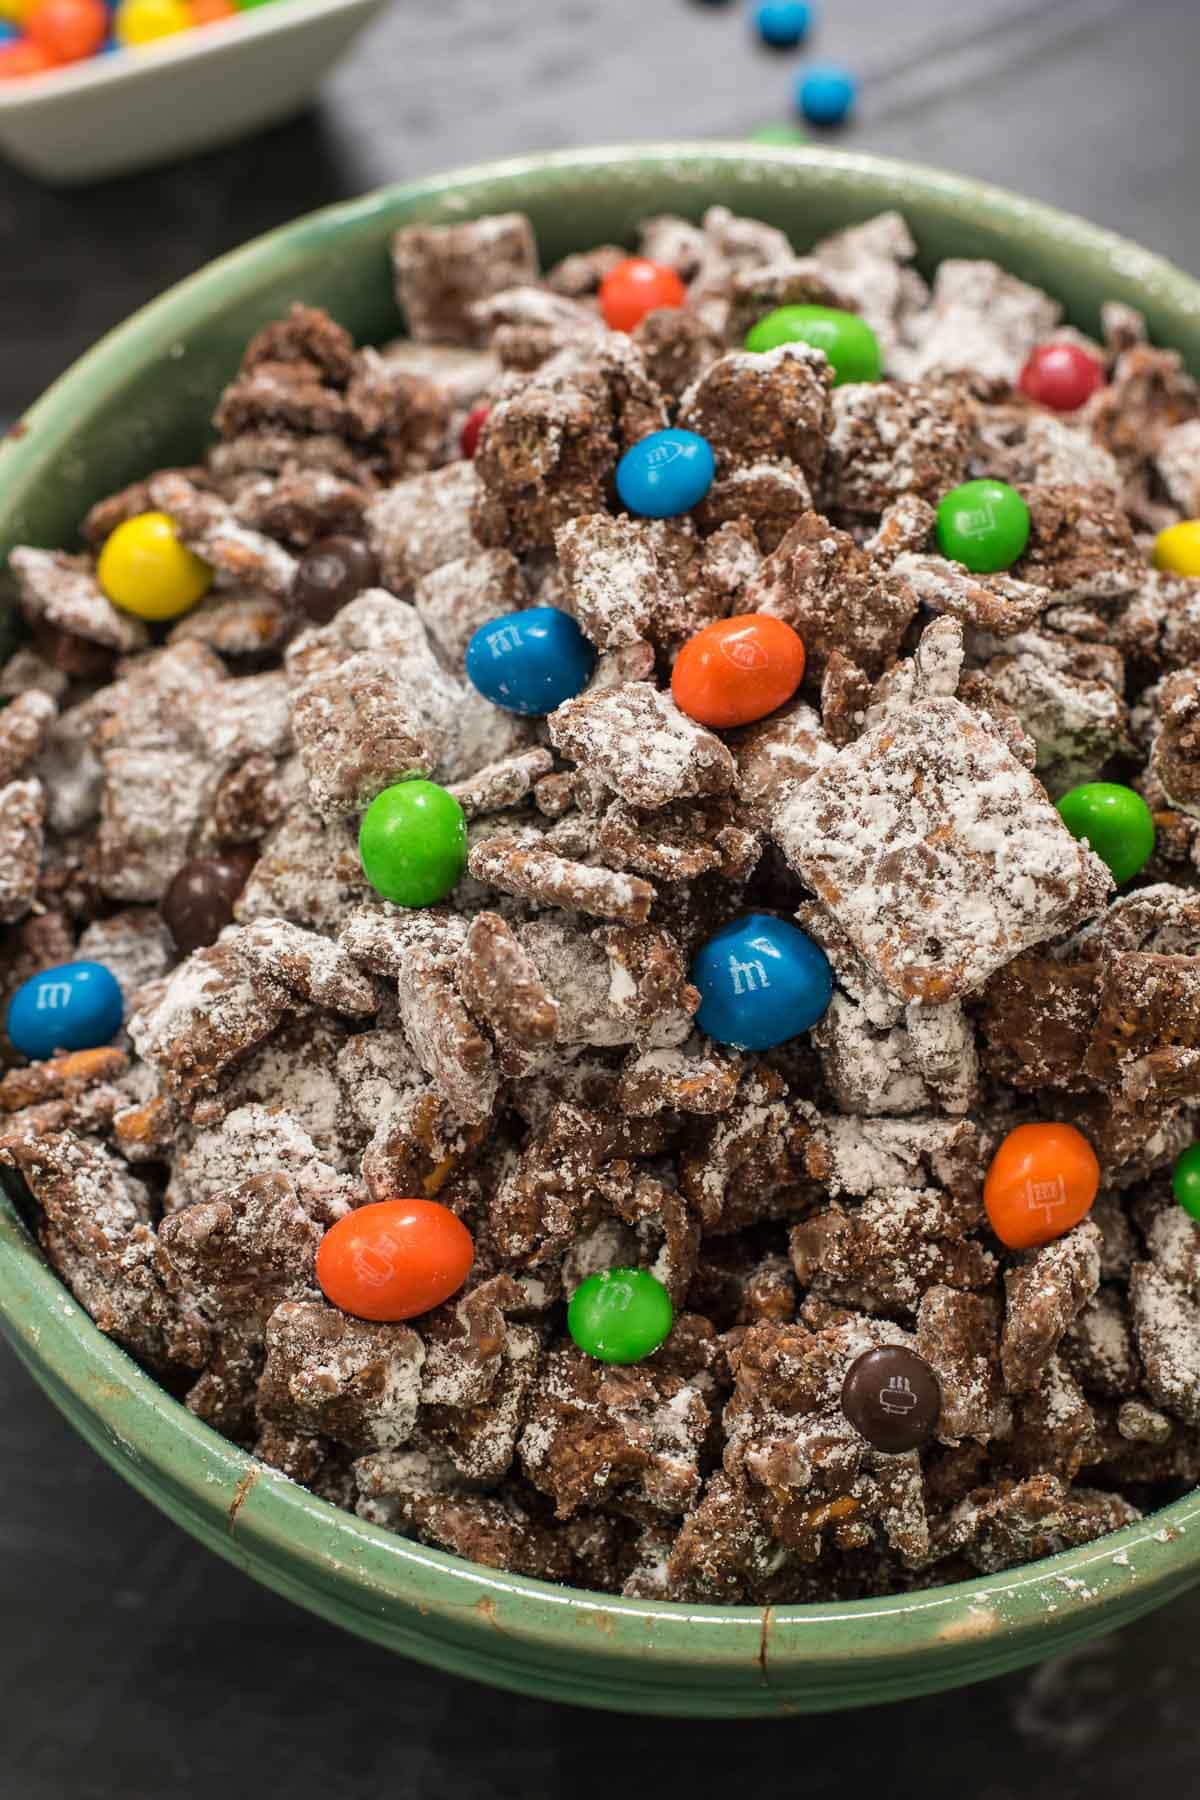 This Chocolate Peanut Butter Puppy Chow is an additive and easy no-bake party snack mix!